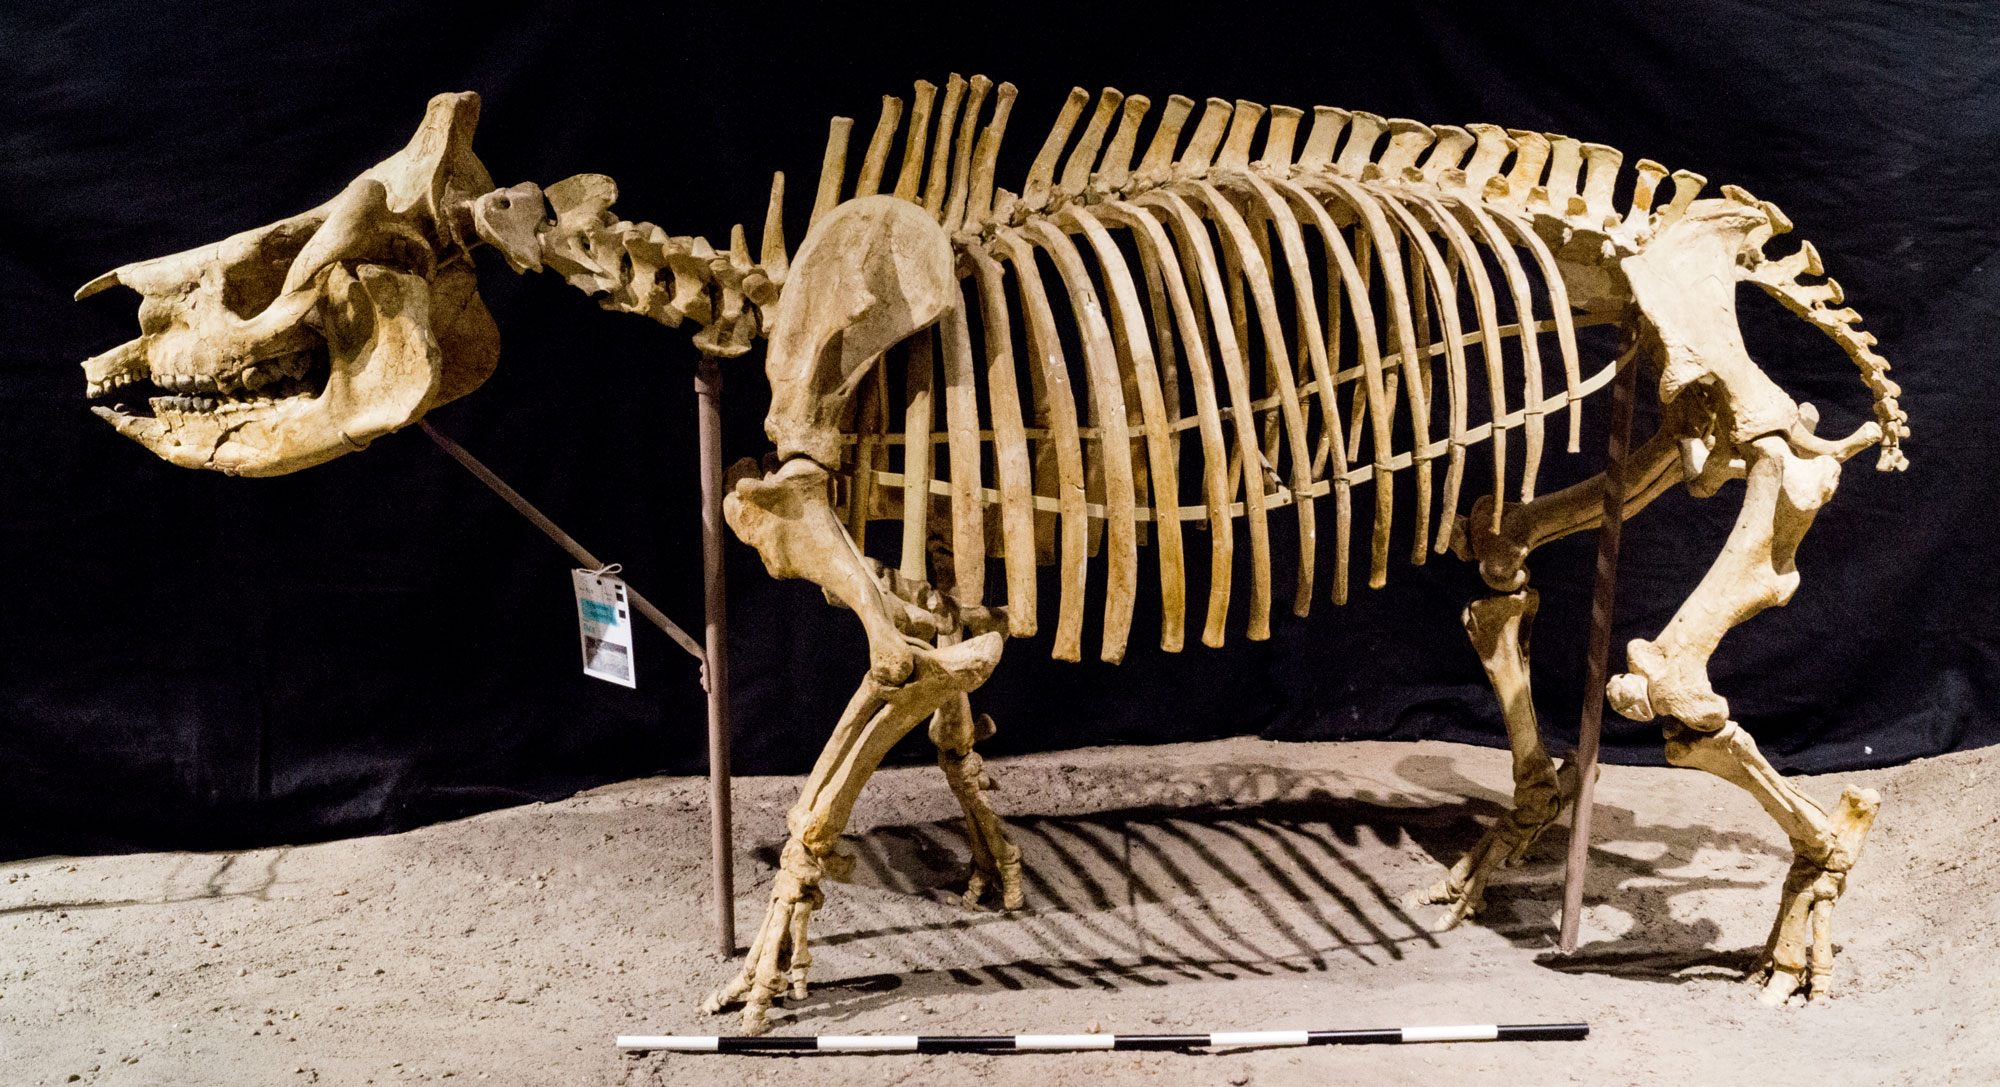 Photograph of the mounted skeleton of a rhinoceros from the Paleogene of eastern Colorado. The animal is stout, walks on all four legs, and has a large, robust head.